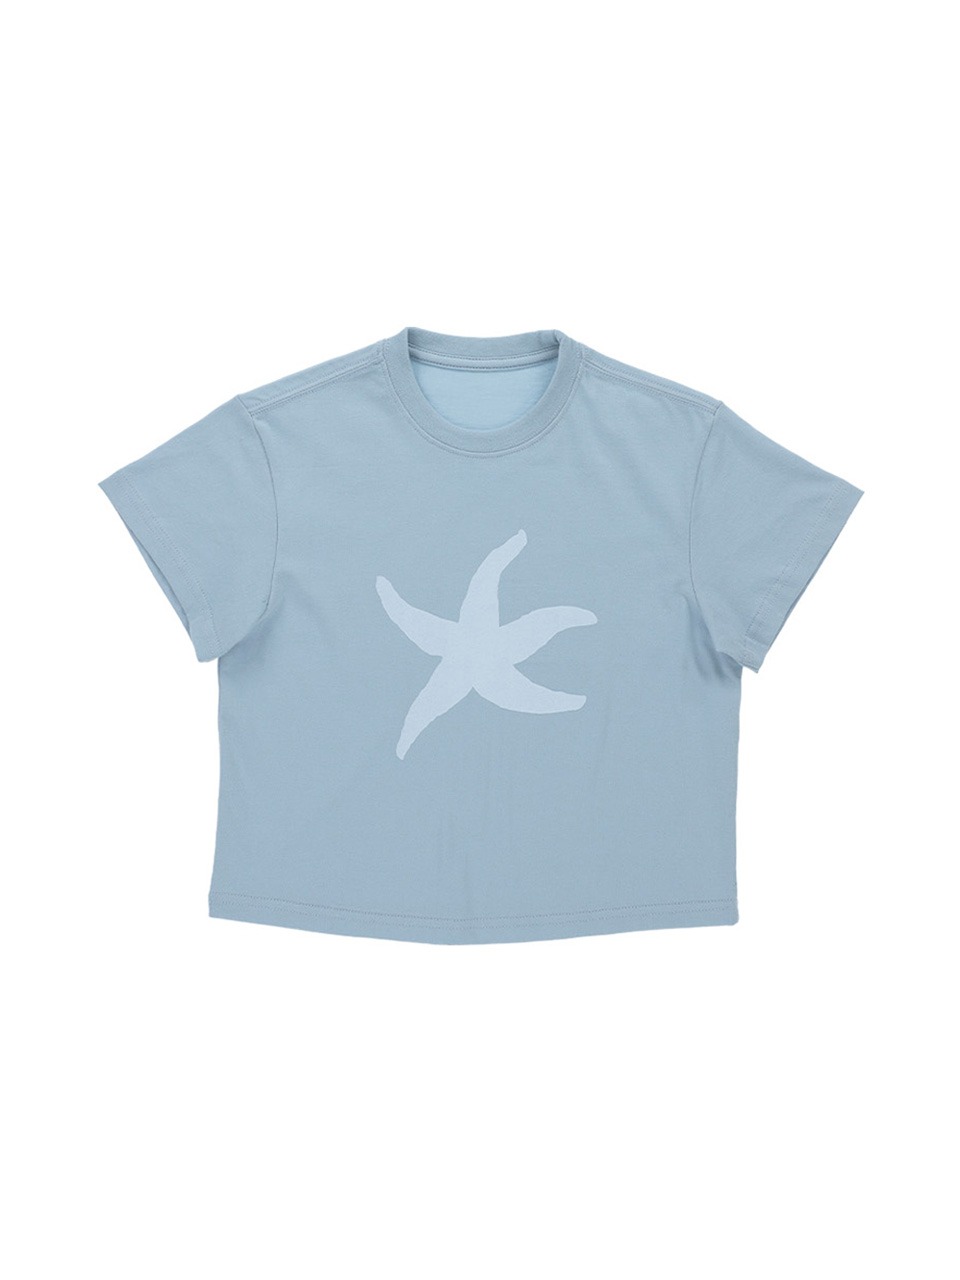 THECOLDESTMOMENT - TCM STARFISH LOGO CROP T (SKY BLUE)